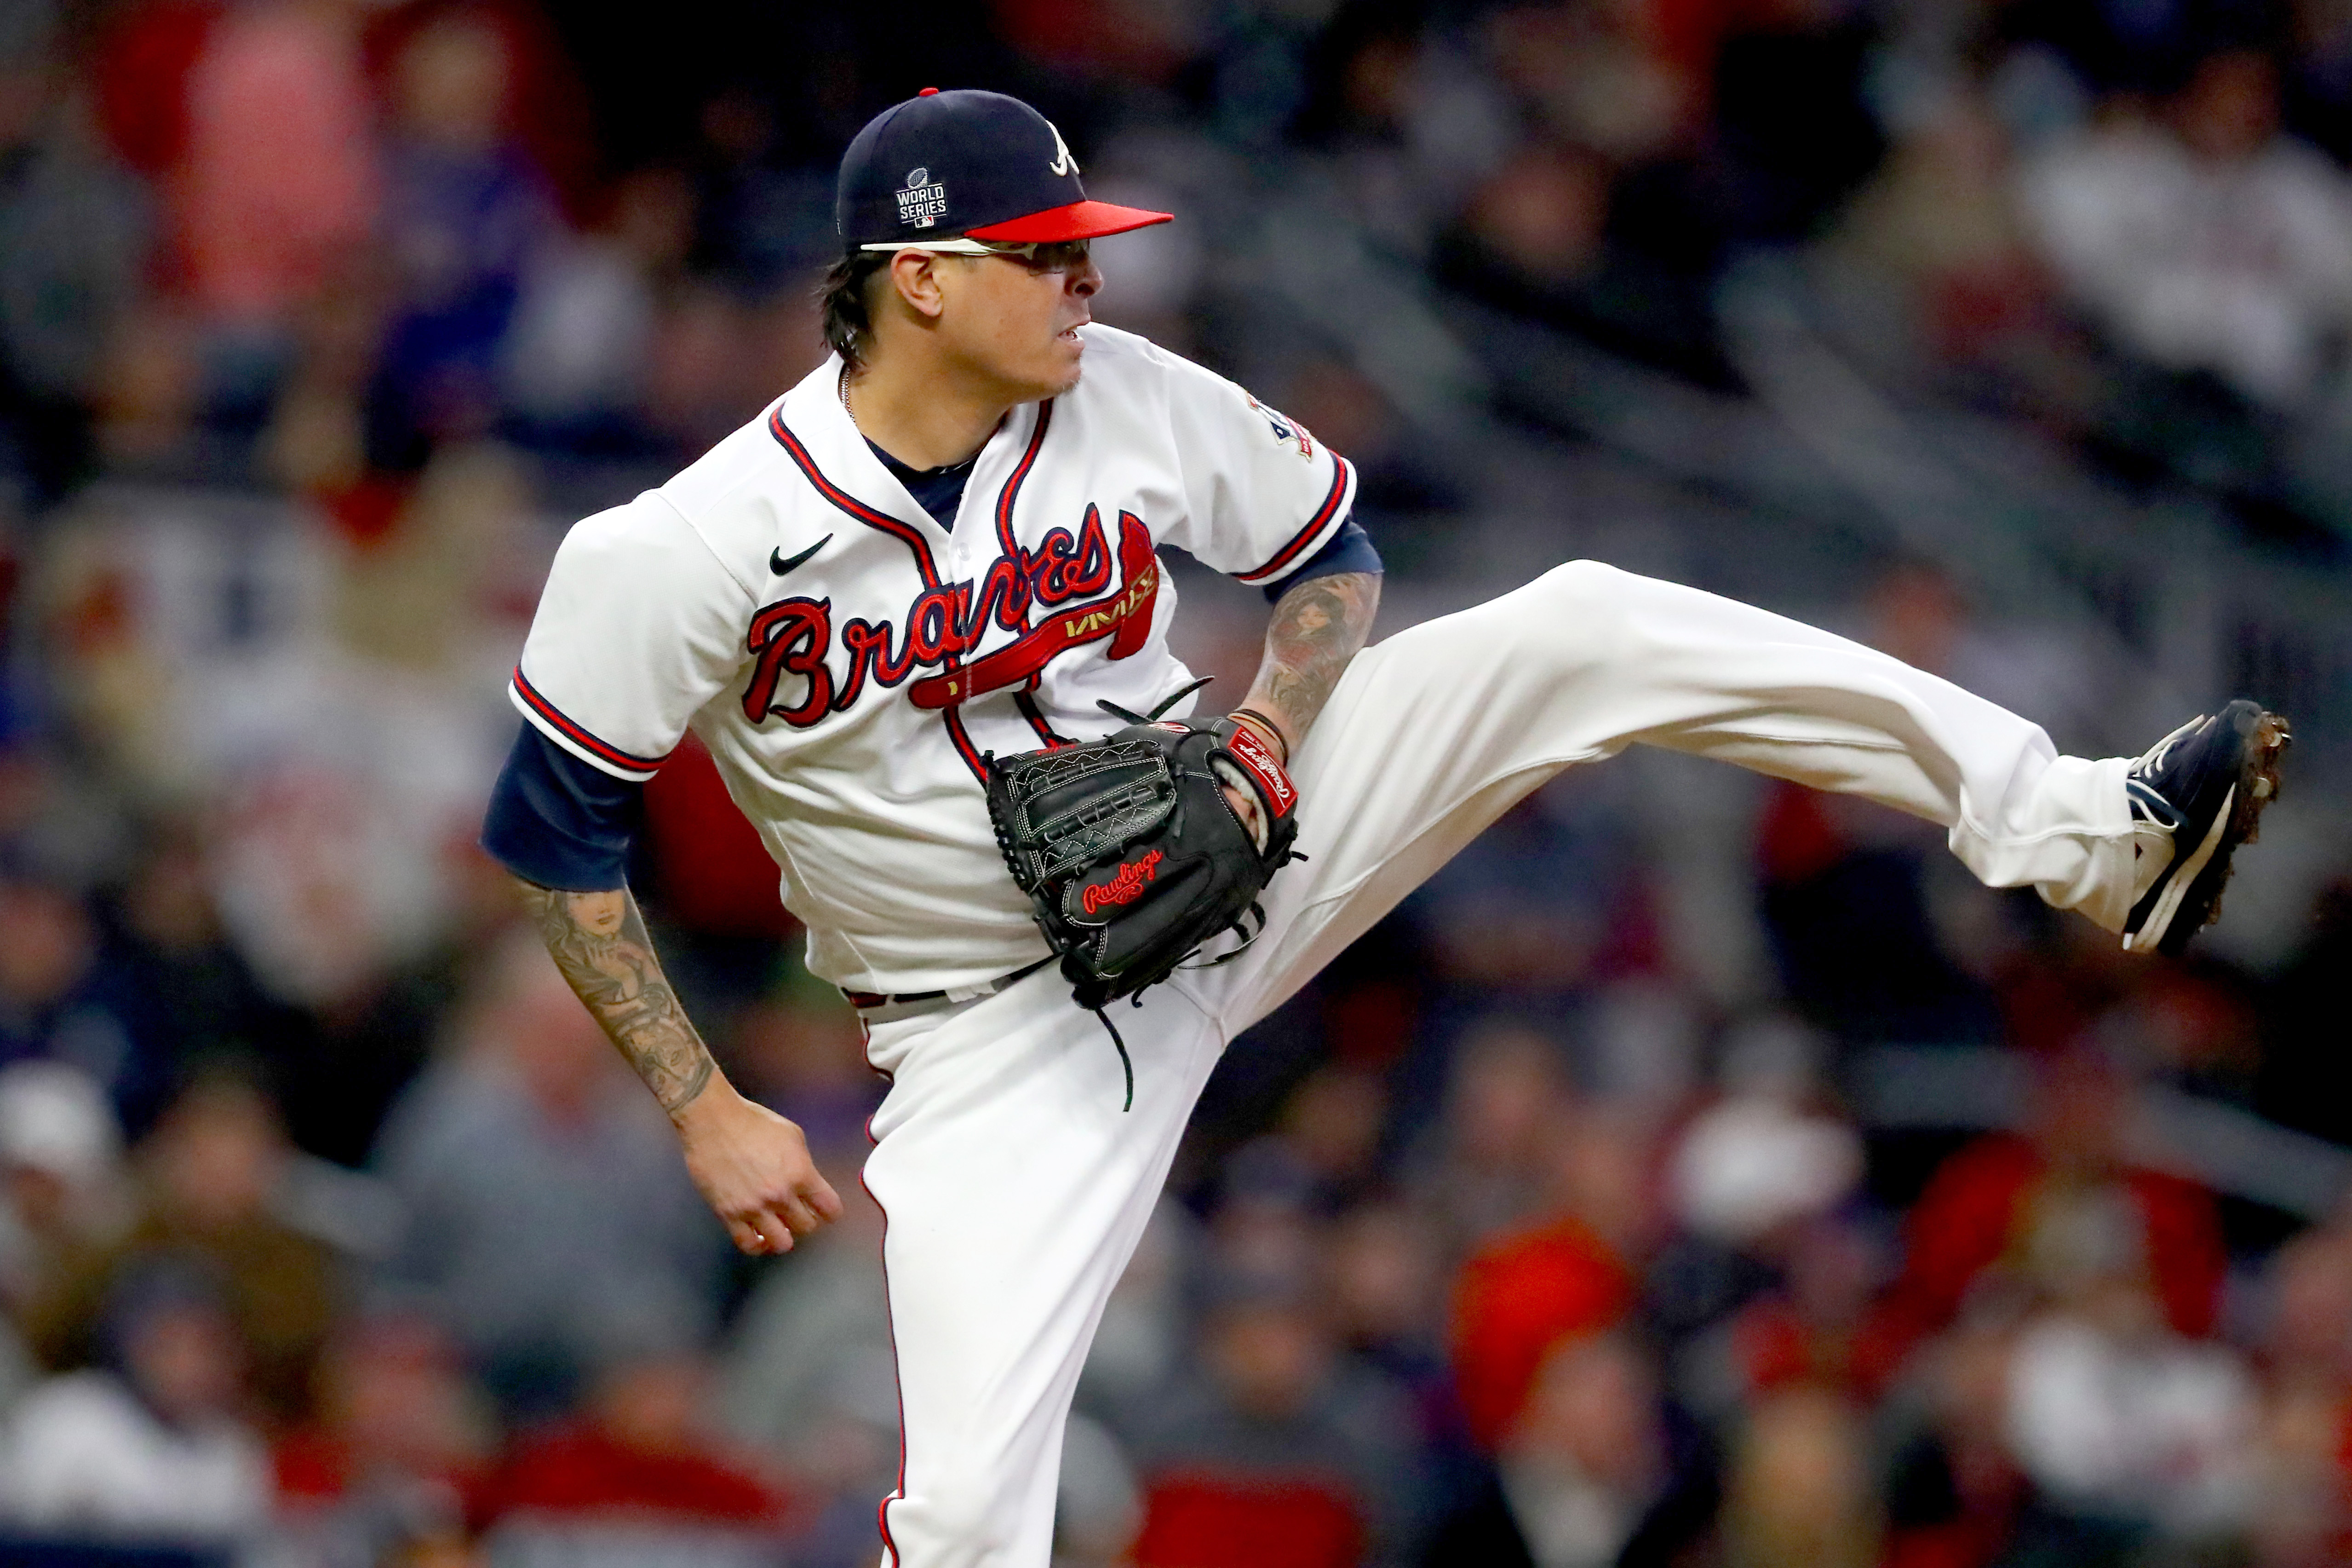 Braves add Jesse Chavez, reinstate Austin Riley to active roster